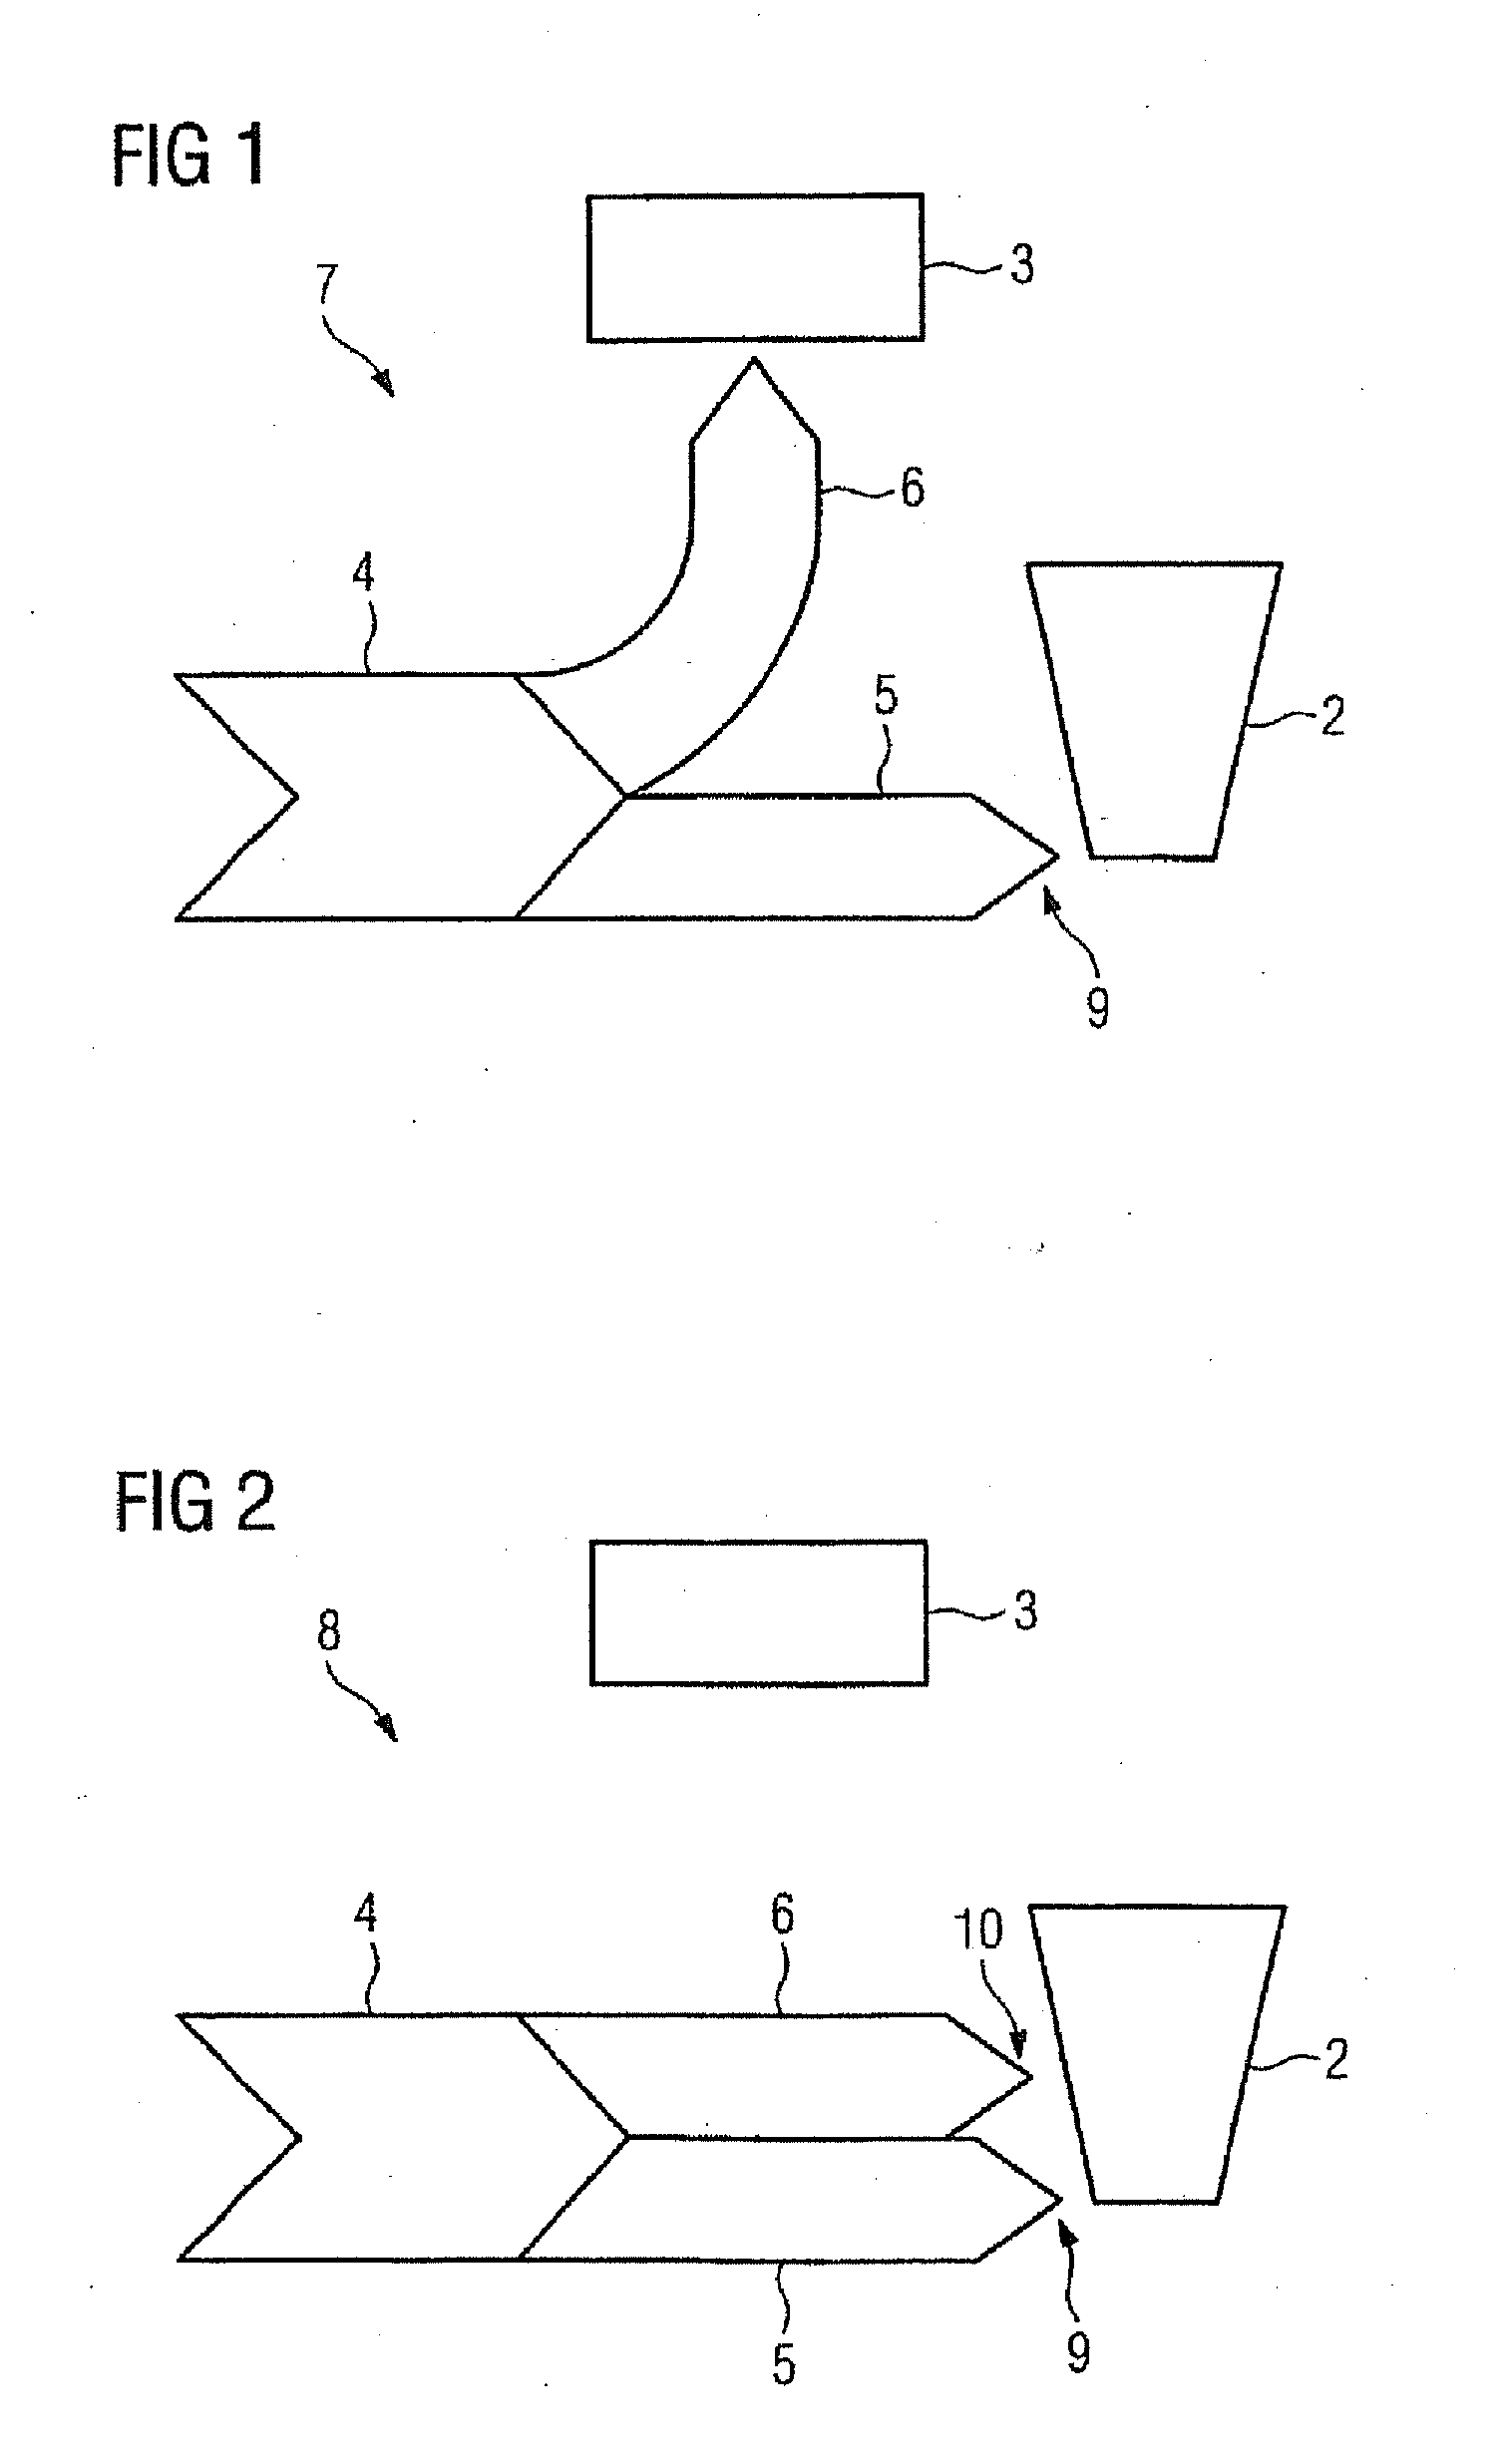 Method and Device for Operating a Steam Power Station Comprising a Steam Turbine and a Process Steam Consumer